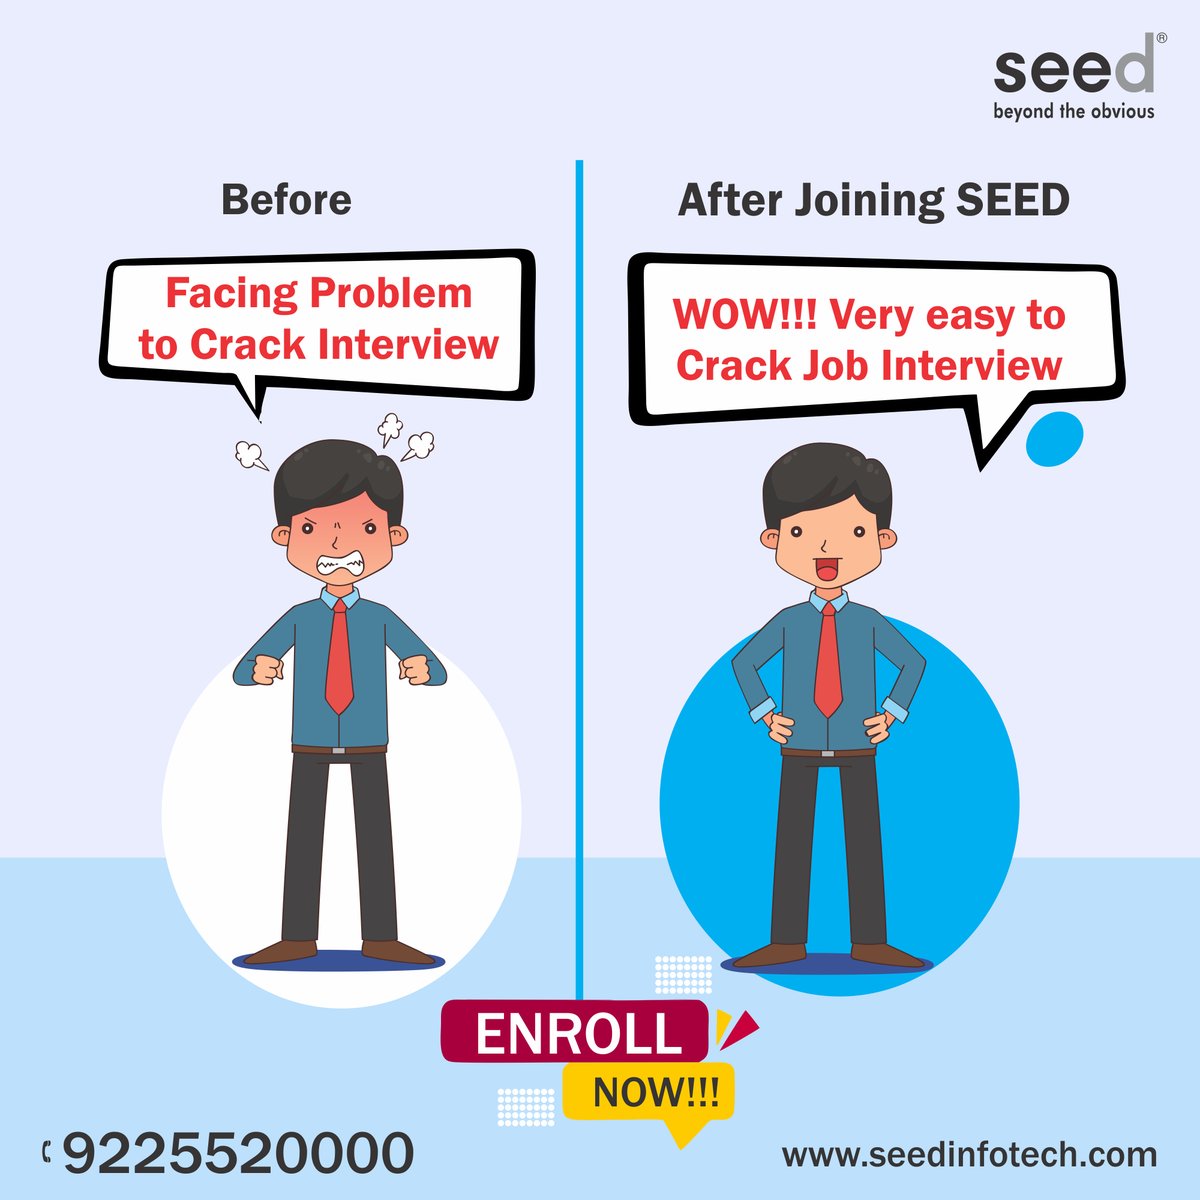 Join SEED and Get Placed
Best IT Training institute with 100% Placement Assistance
For details:
📷Call: 9225520000
visit: seedinfotech.com
#seed #seedjobplacement #placement #job2023 #fullstackjava #java #besttraining #bestcareer #frontenddeveloper #codingisfun #program